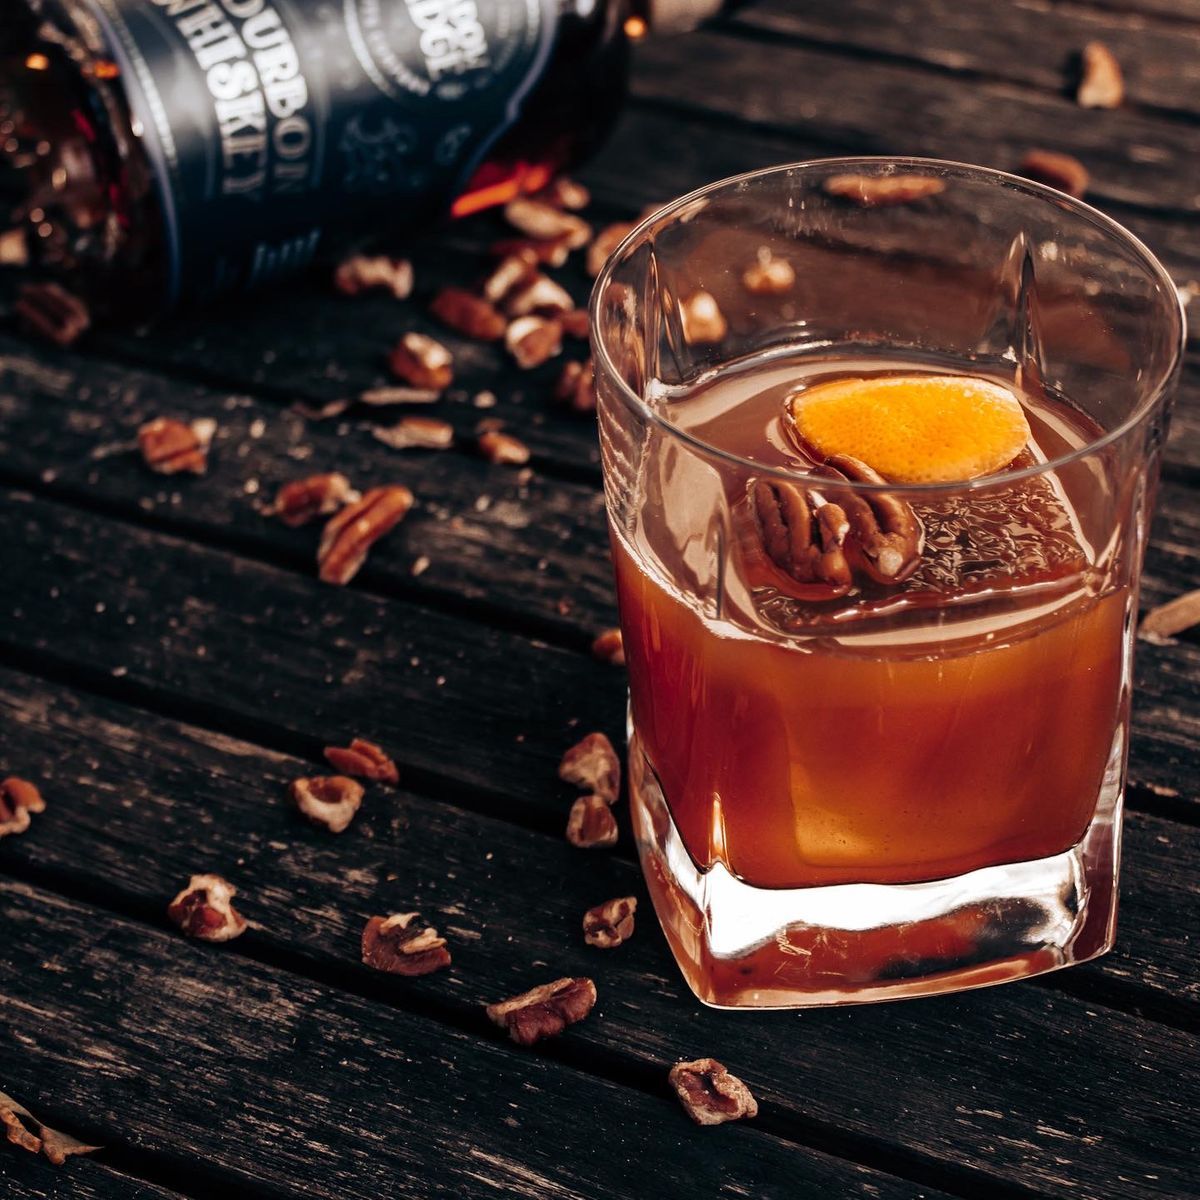 What is your go to bourbon for an old fashioned?

Nothing says holiday season like toasted nuts - so here’s some in a drink!